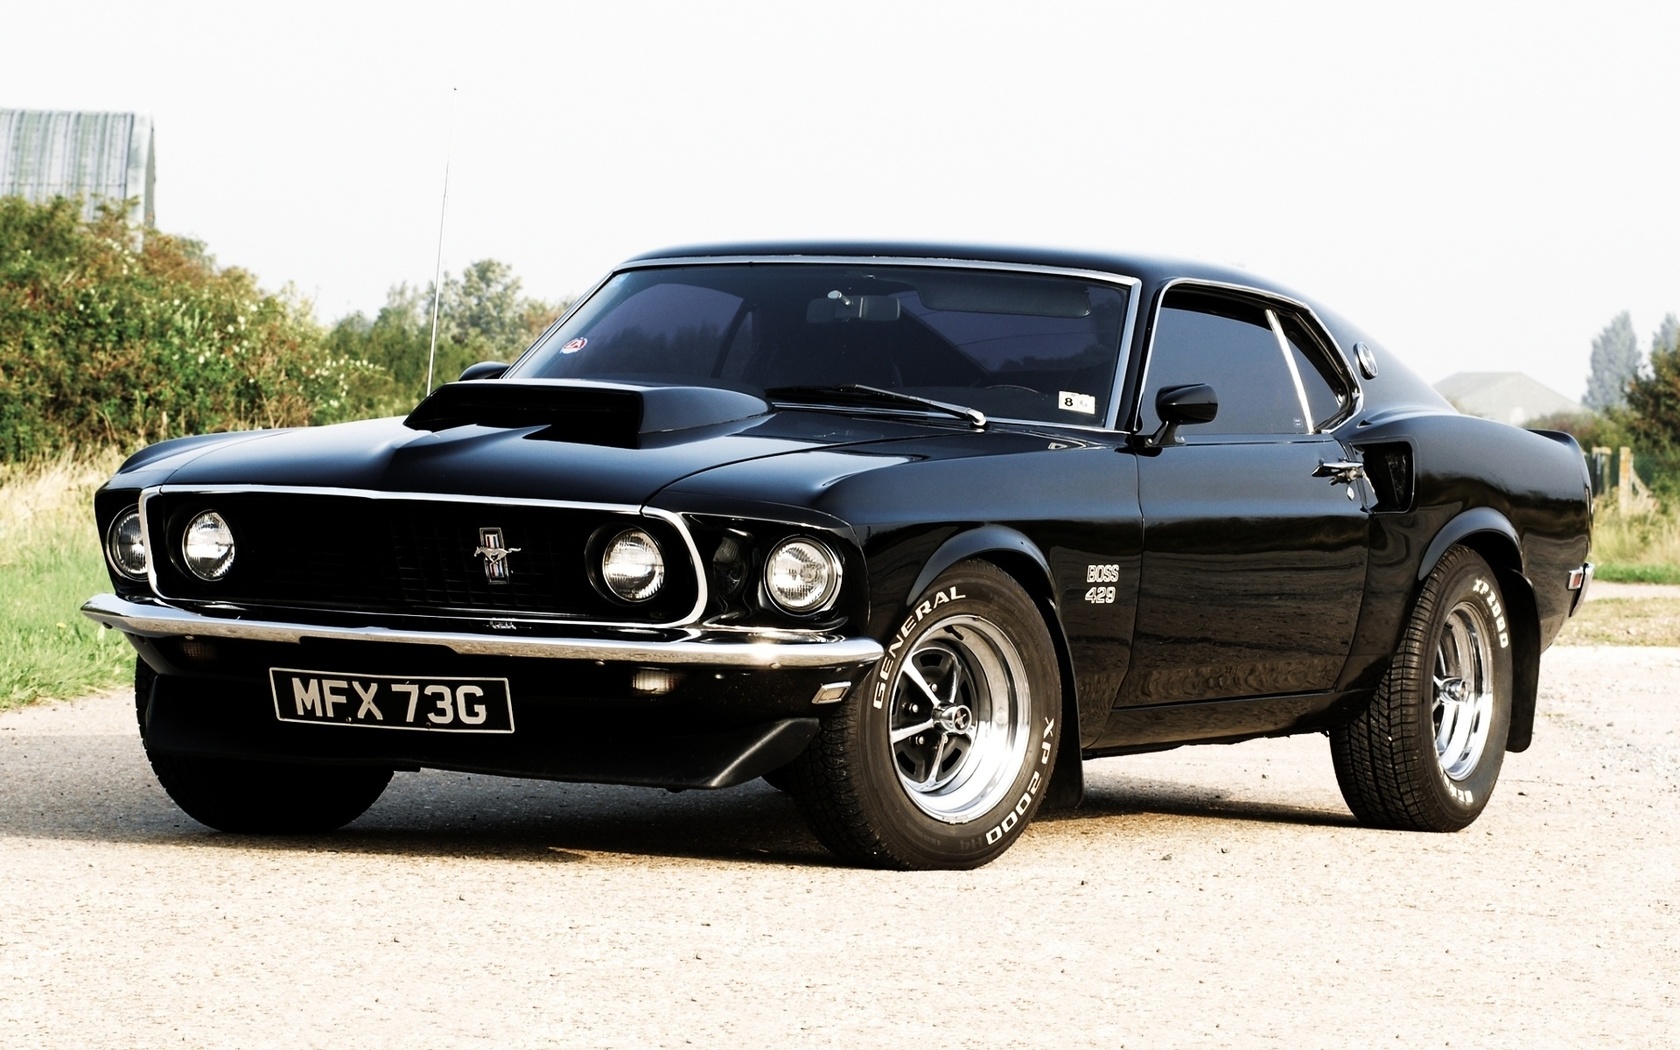 , , mustang, , Ford, , 429, , 1969, boss